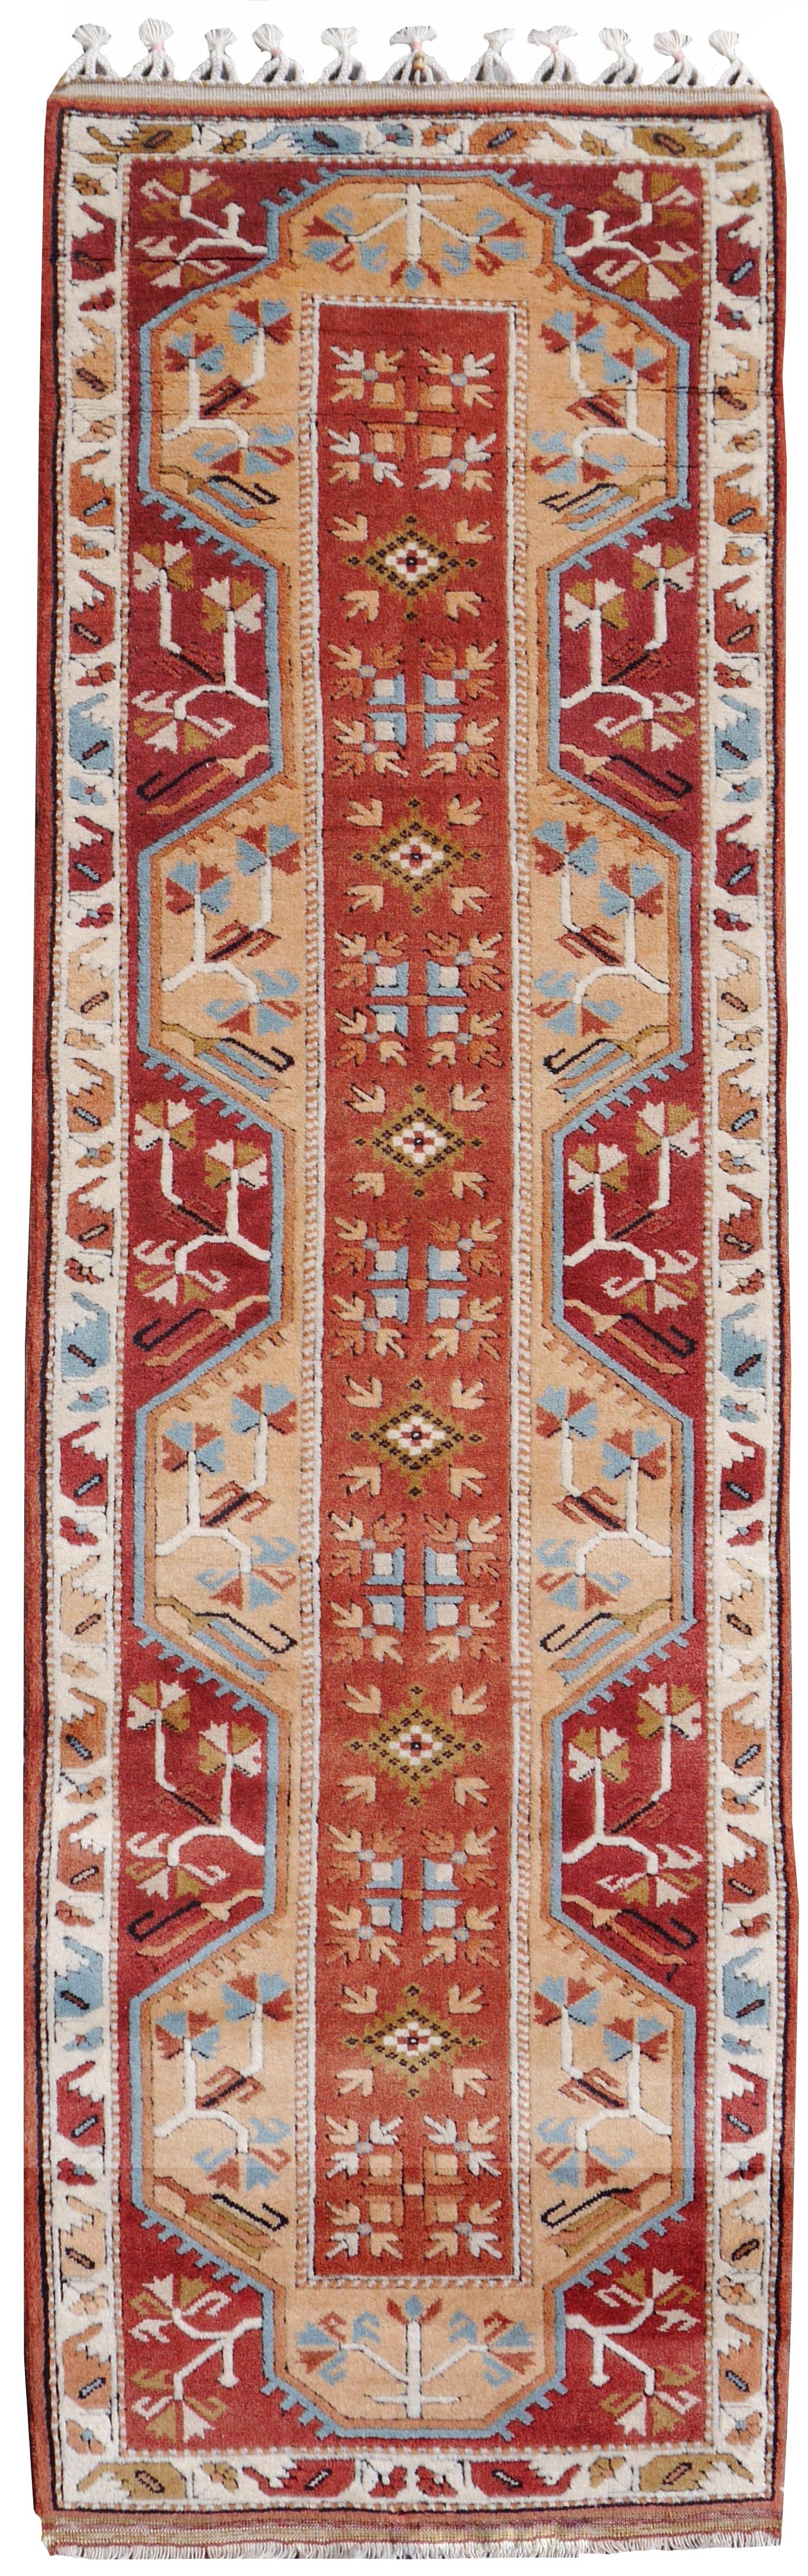 Hallway Runner Stairway Oushak Rug Hand Knotted Bold Design Djoharian Collection For Sale 4